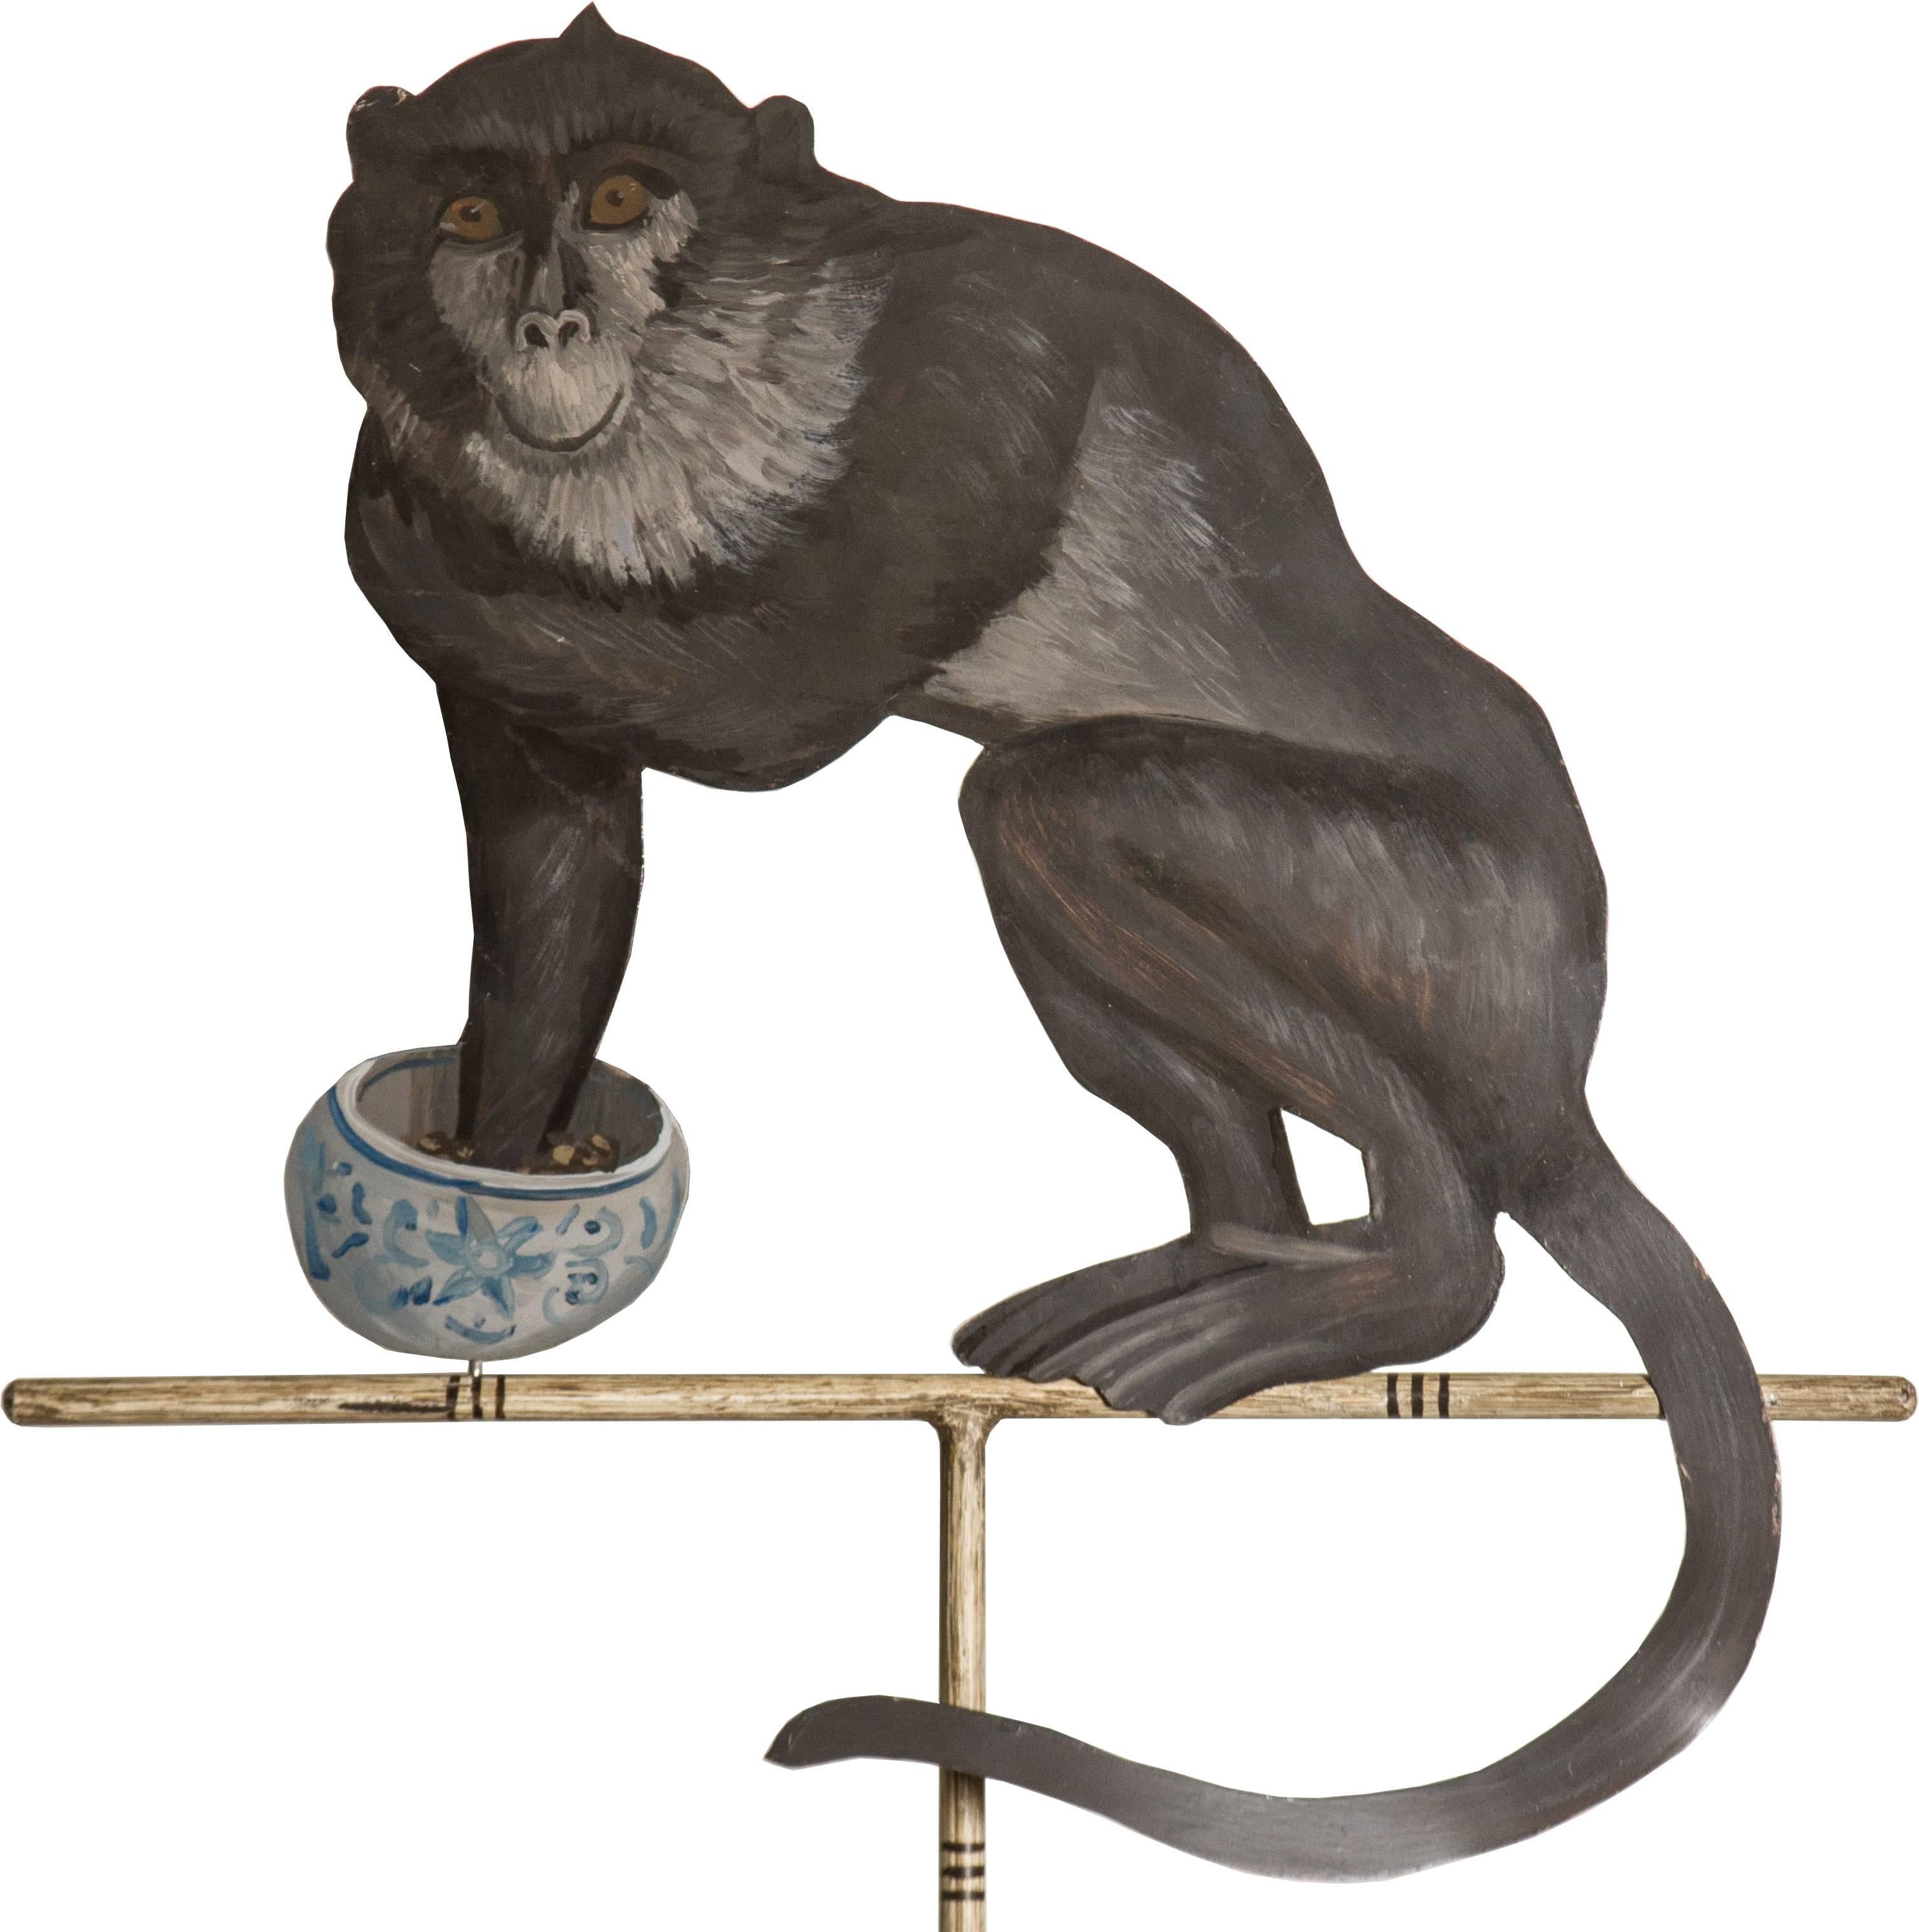 These are a whimsical pair of painted monkeys perched on stands.